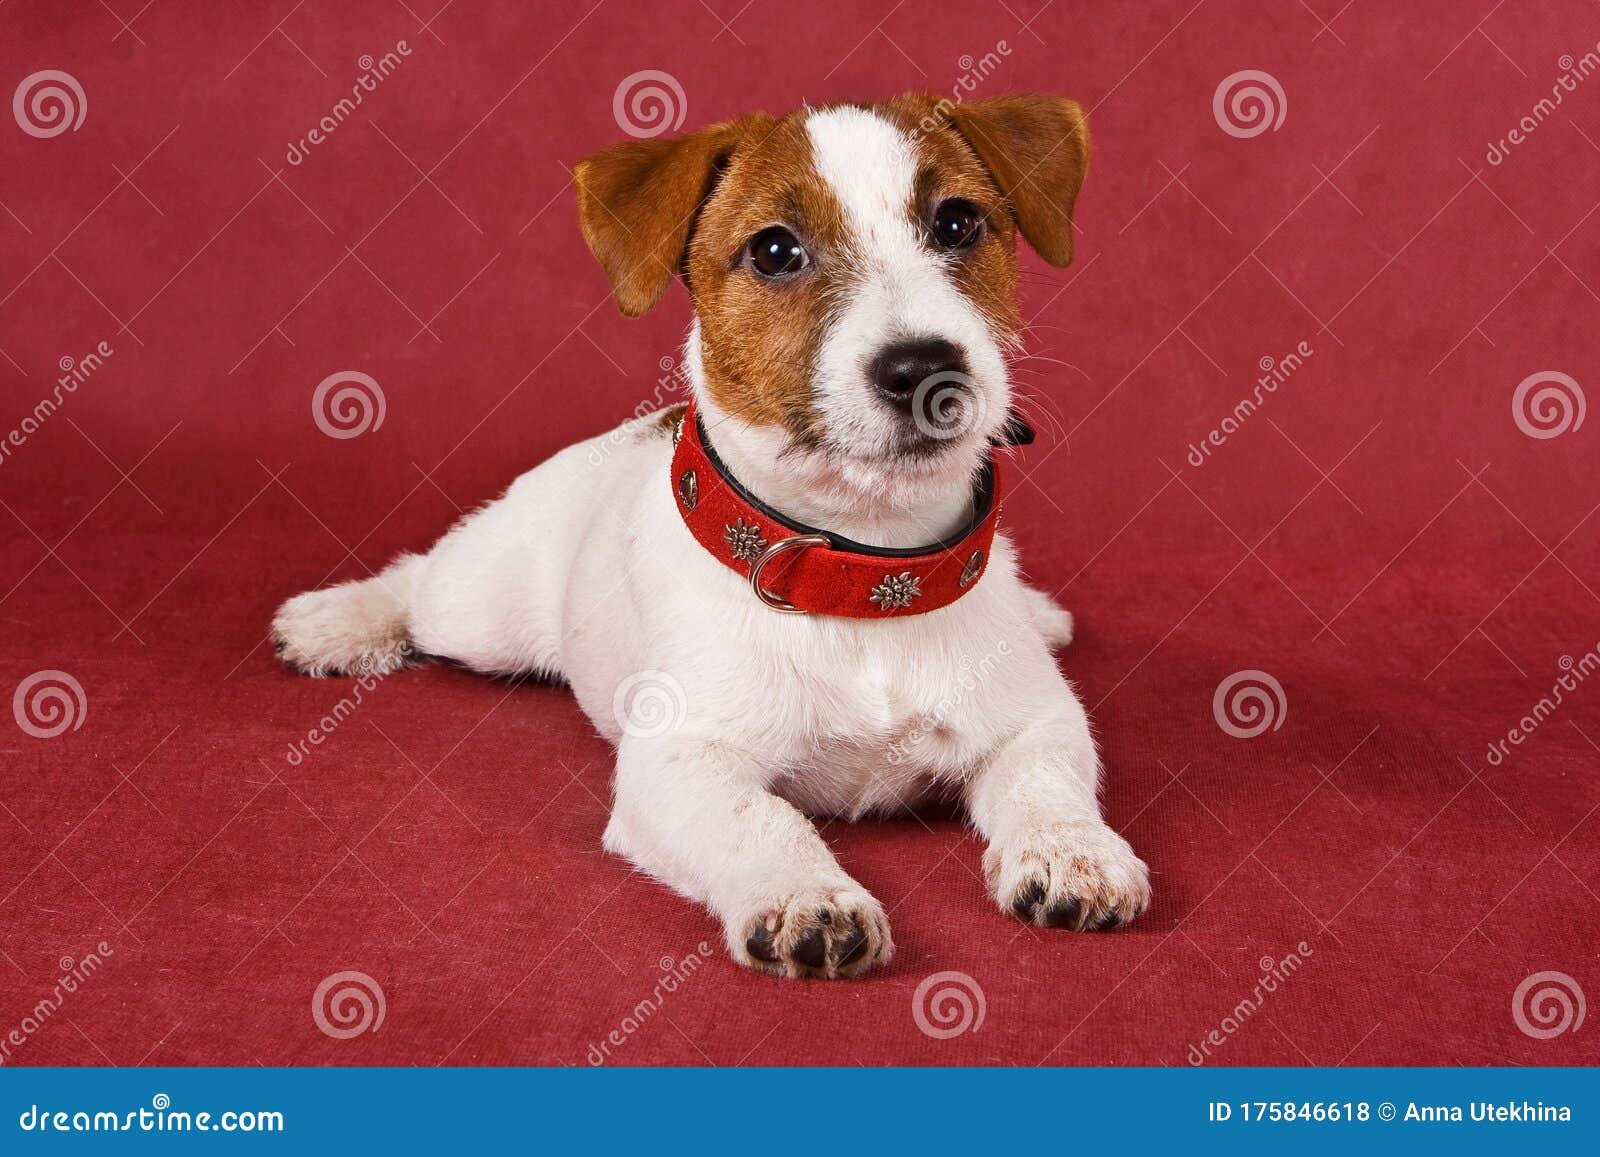 Jack Russell Terrier Dog on a Red Background in a Red Collar Stock Photo -  Image of shot, collar: 175846618